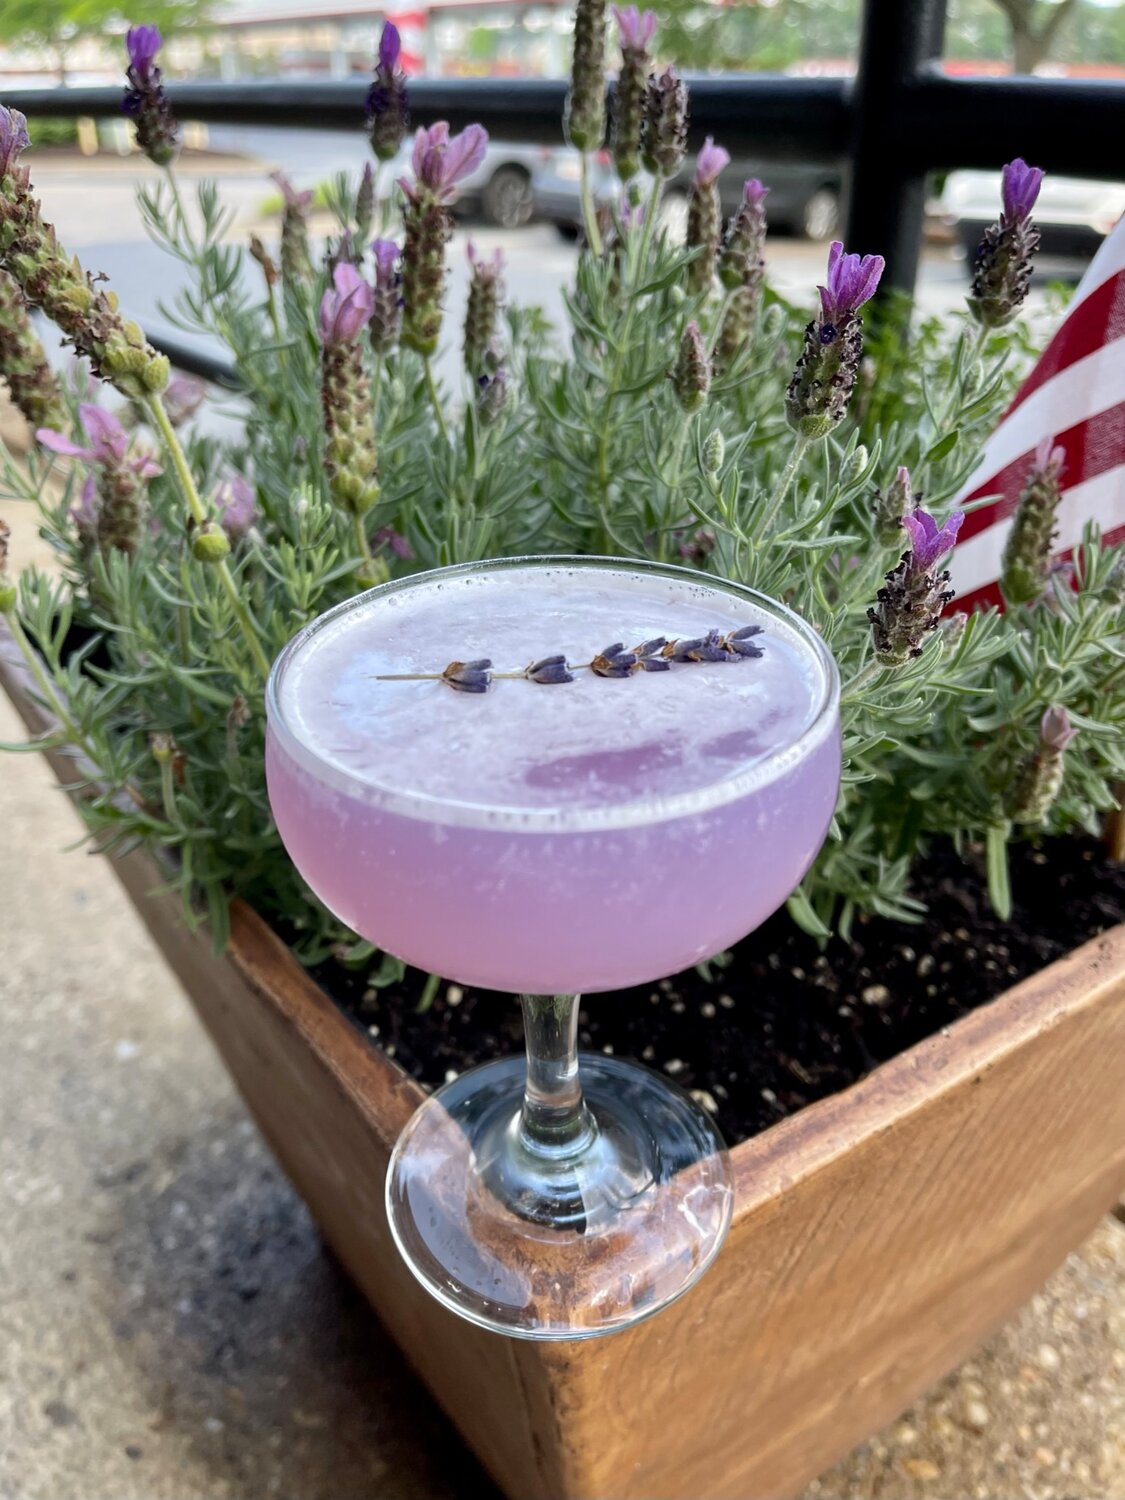 Starting in June, patrons at Founders Tavern & Grille can try this lavender gin sour with ingredients grown by the restaurant’s owners.